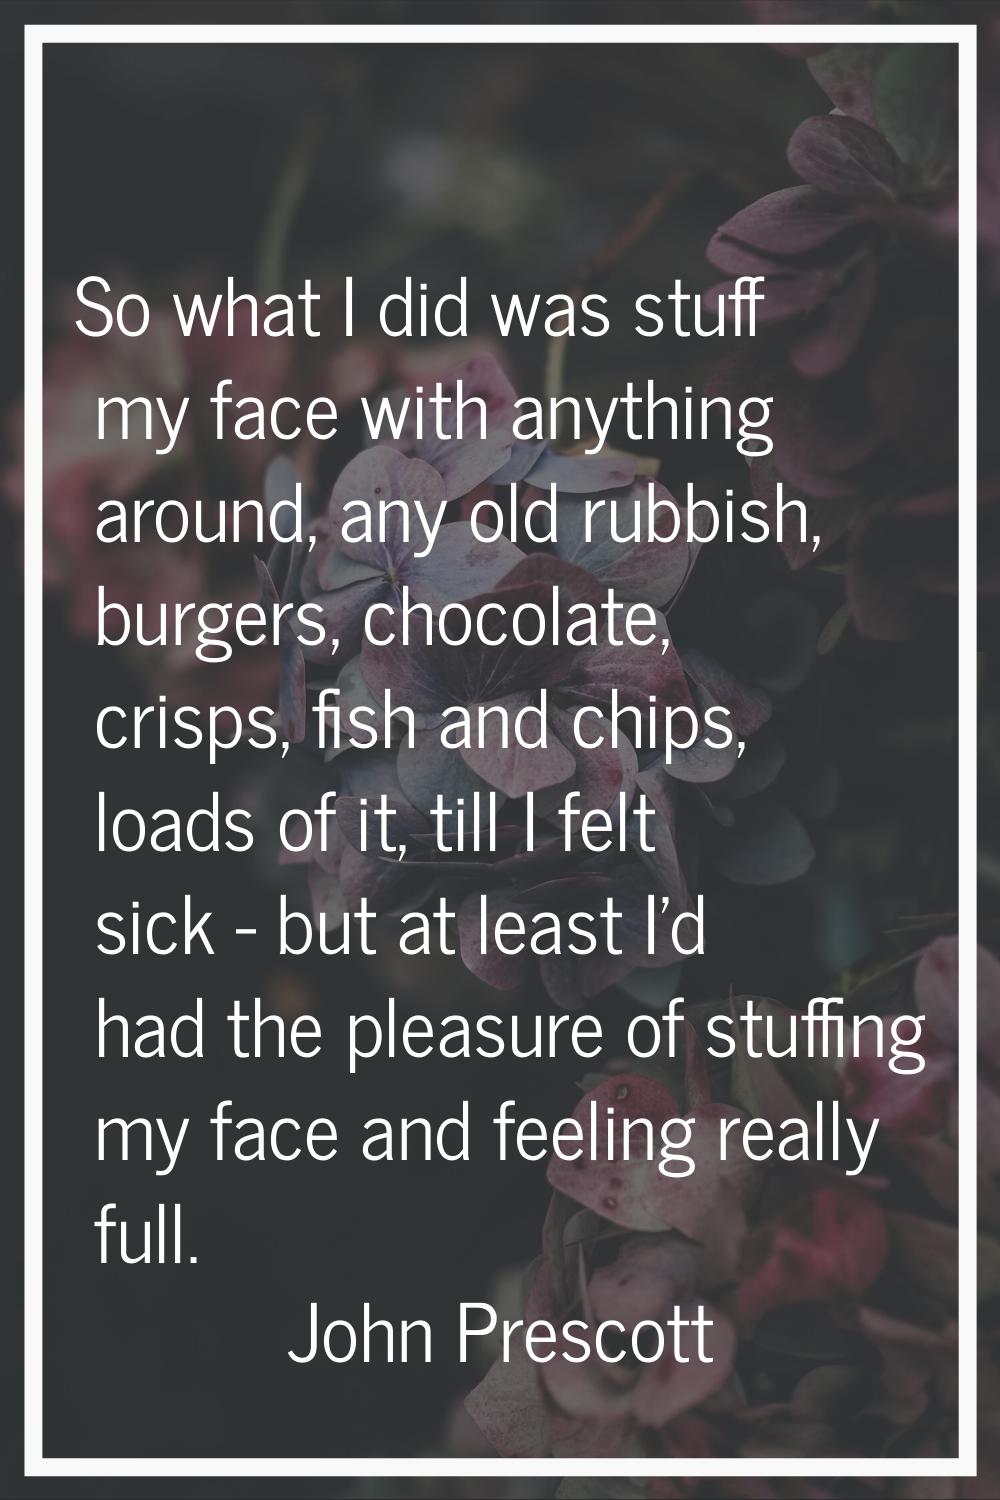 So what I did was stuff my face with anything around, any old rubbish, burgers, chocolate, crisps, 